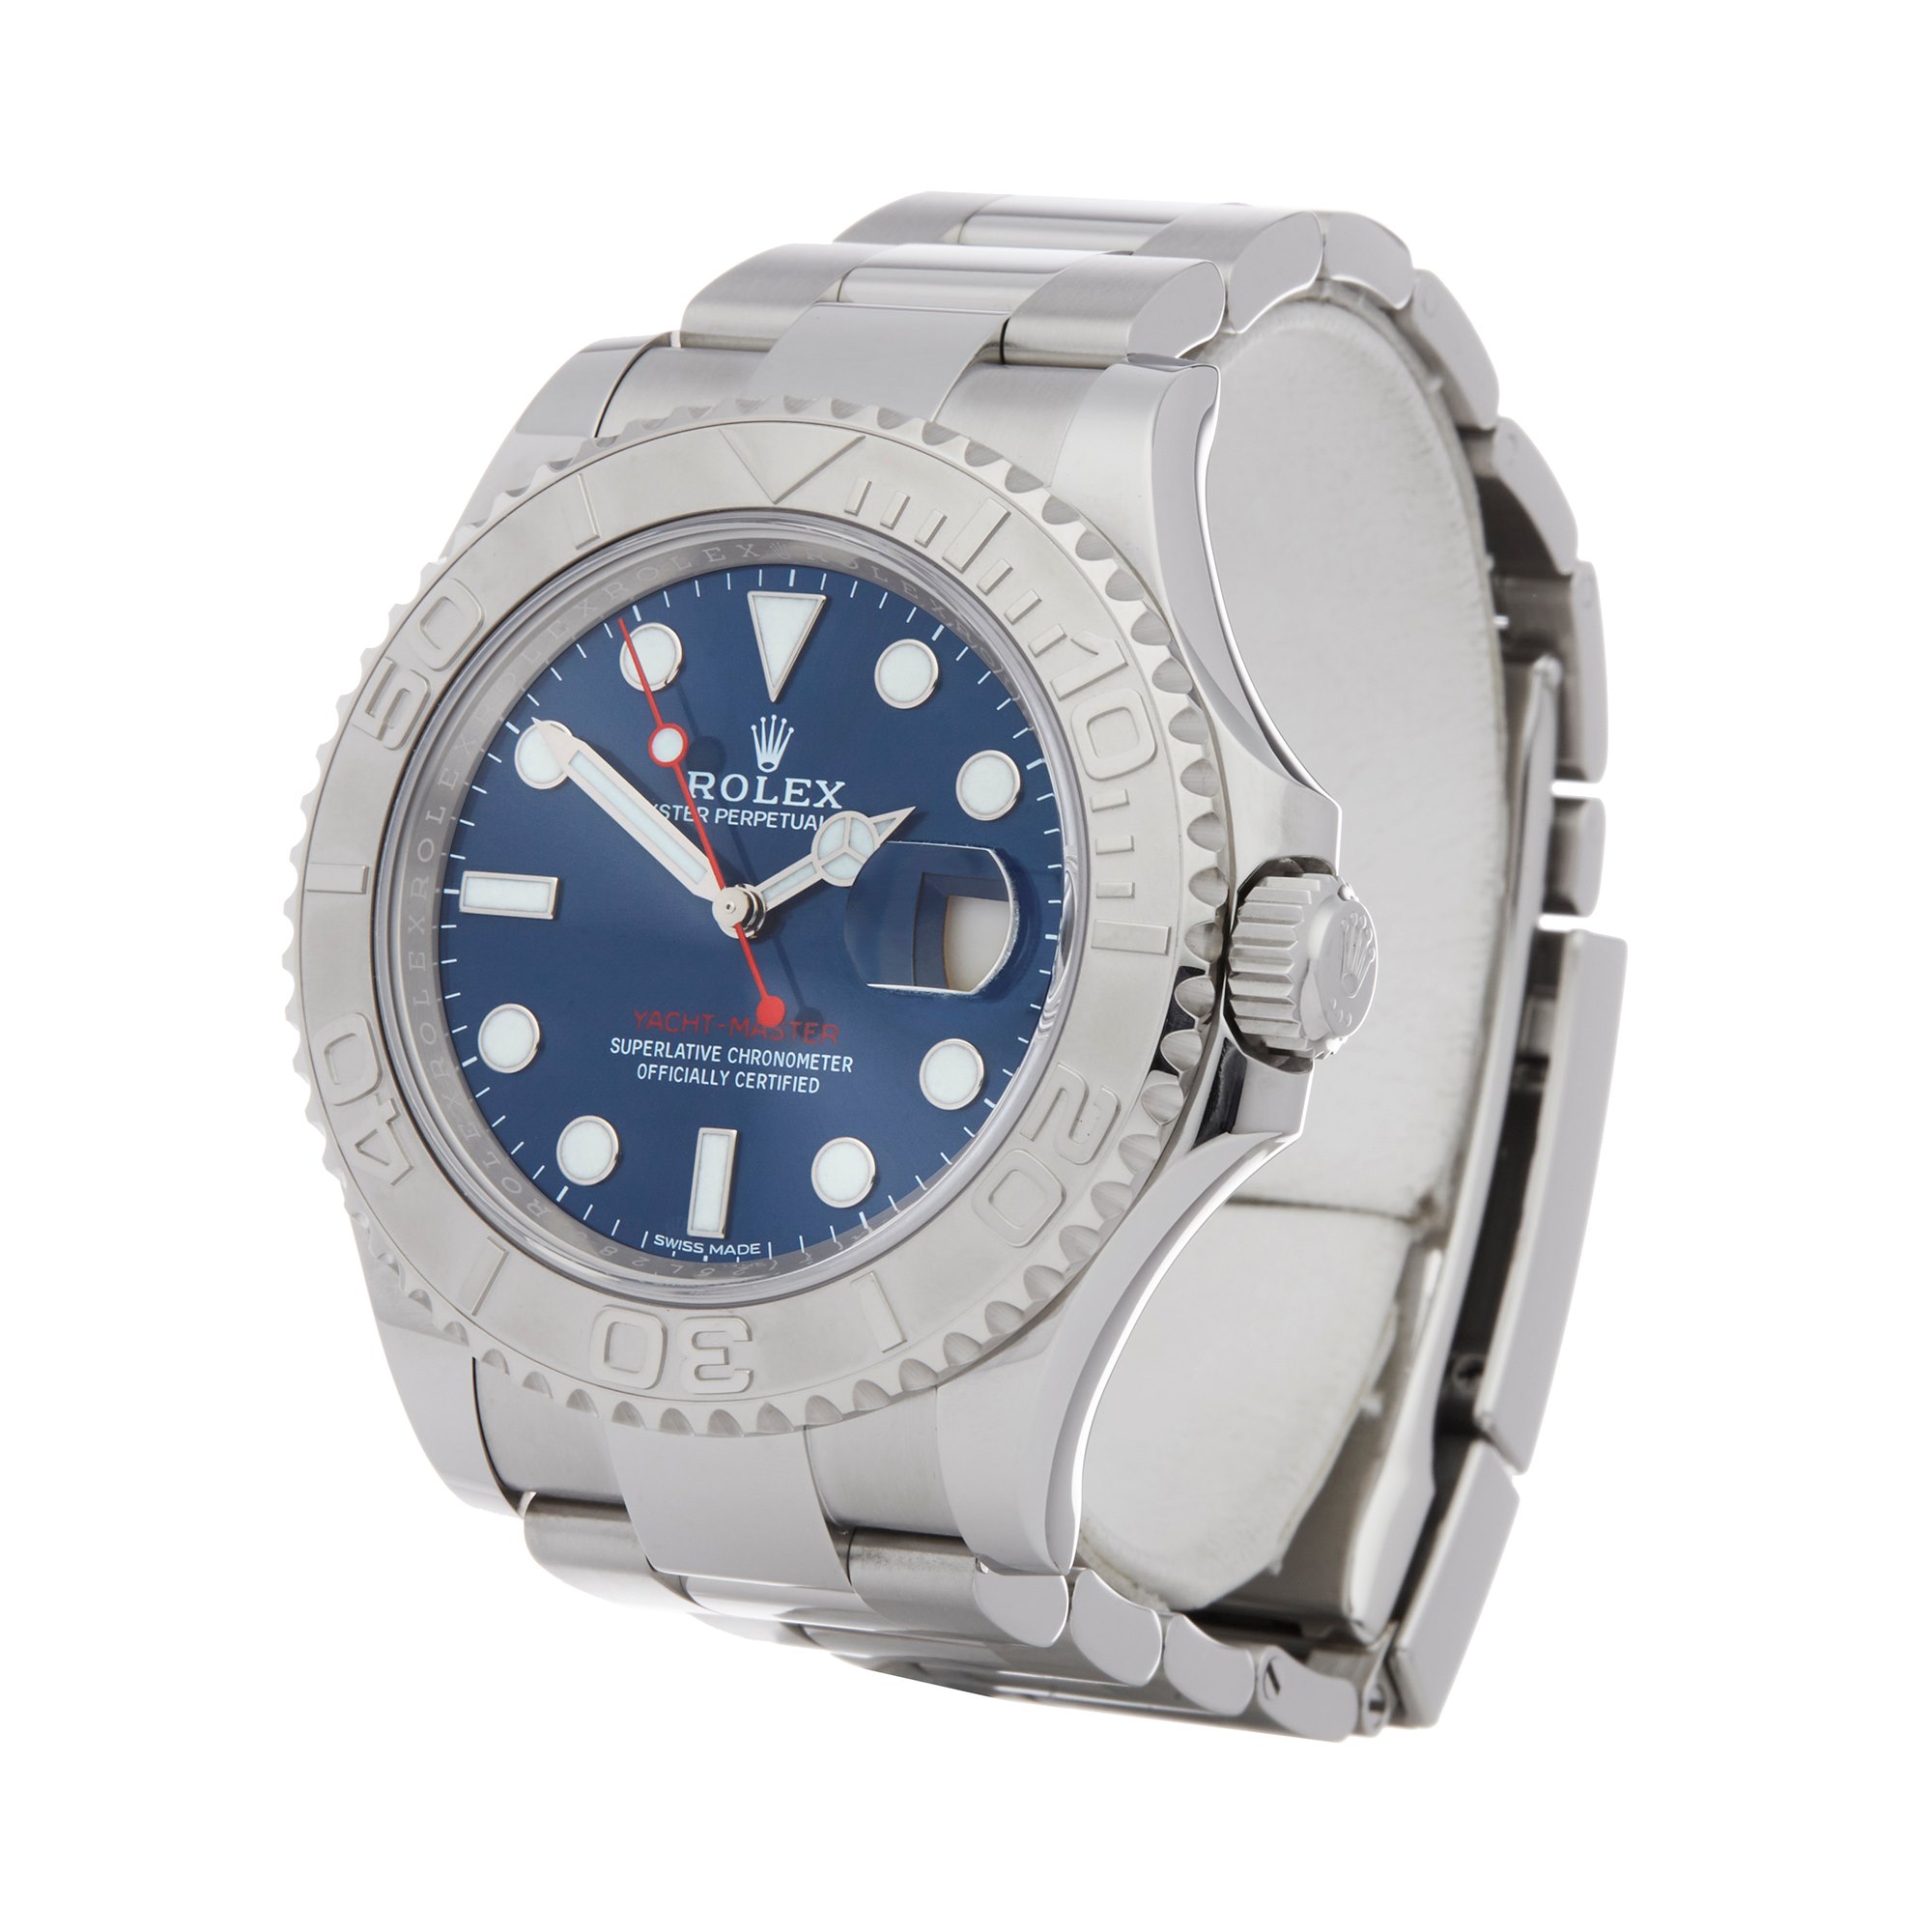 Rolex Yacht-Master 40 116622 Men's Stainless Steel Watch - Image 8 of 8